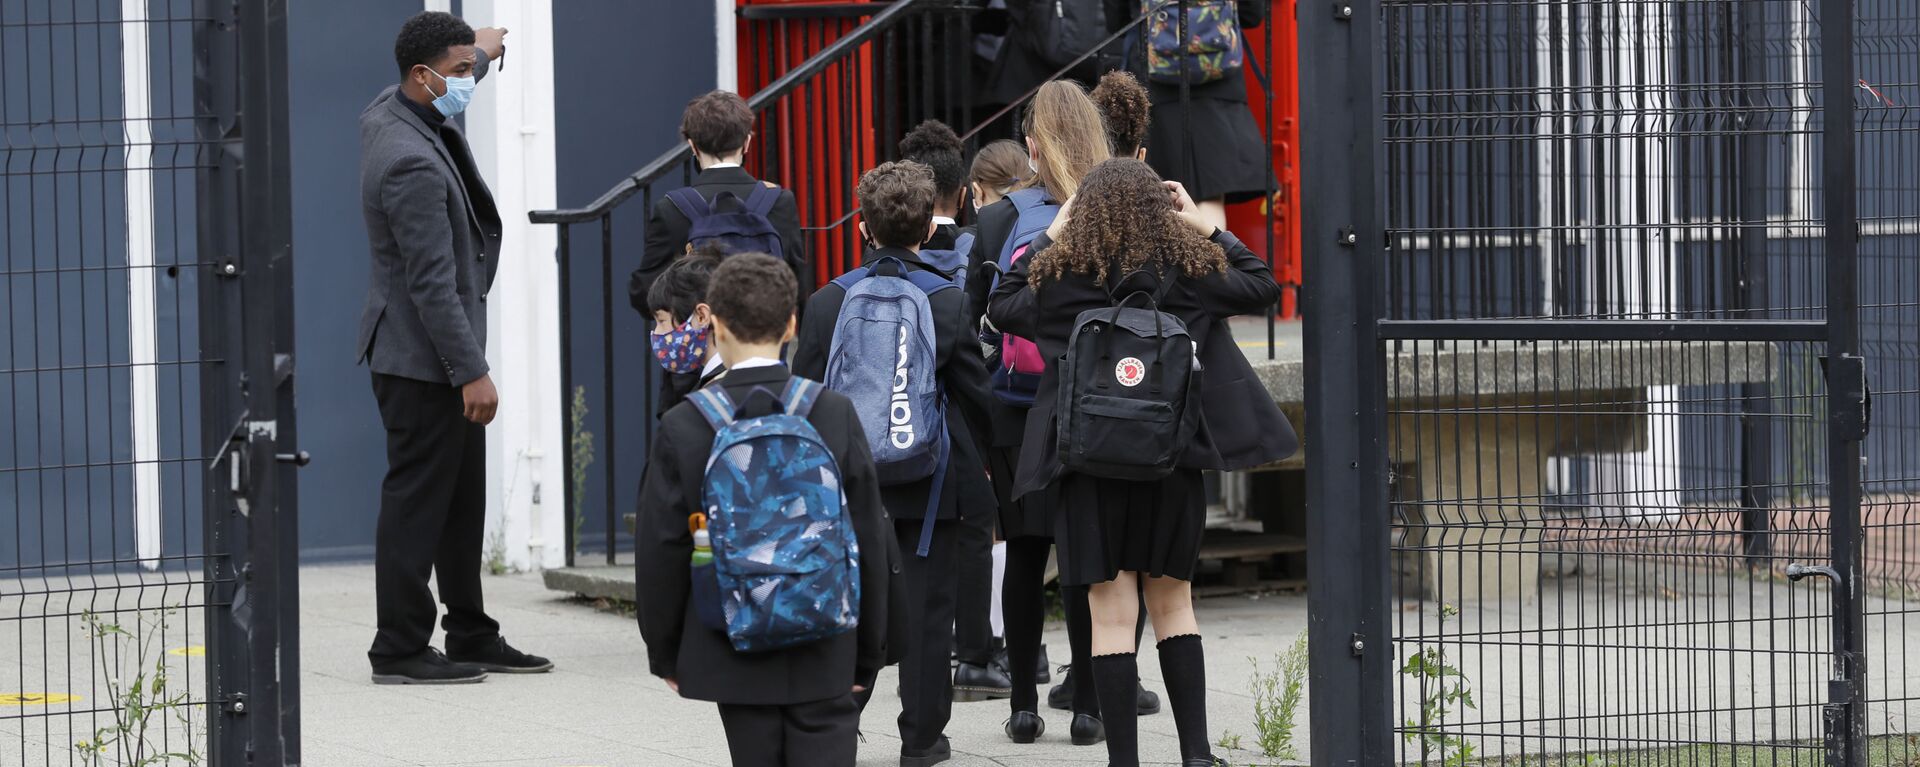 Year seven pupils are directed to socially distance as they arrive for their first day at Kingsdale Foundation School in London, Thursday, 3 September 2020 - Sputnik International, 1920, 25.02.2021